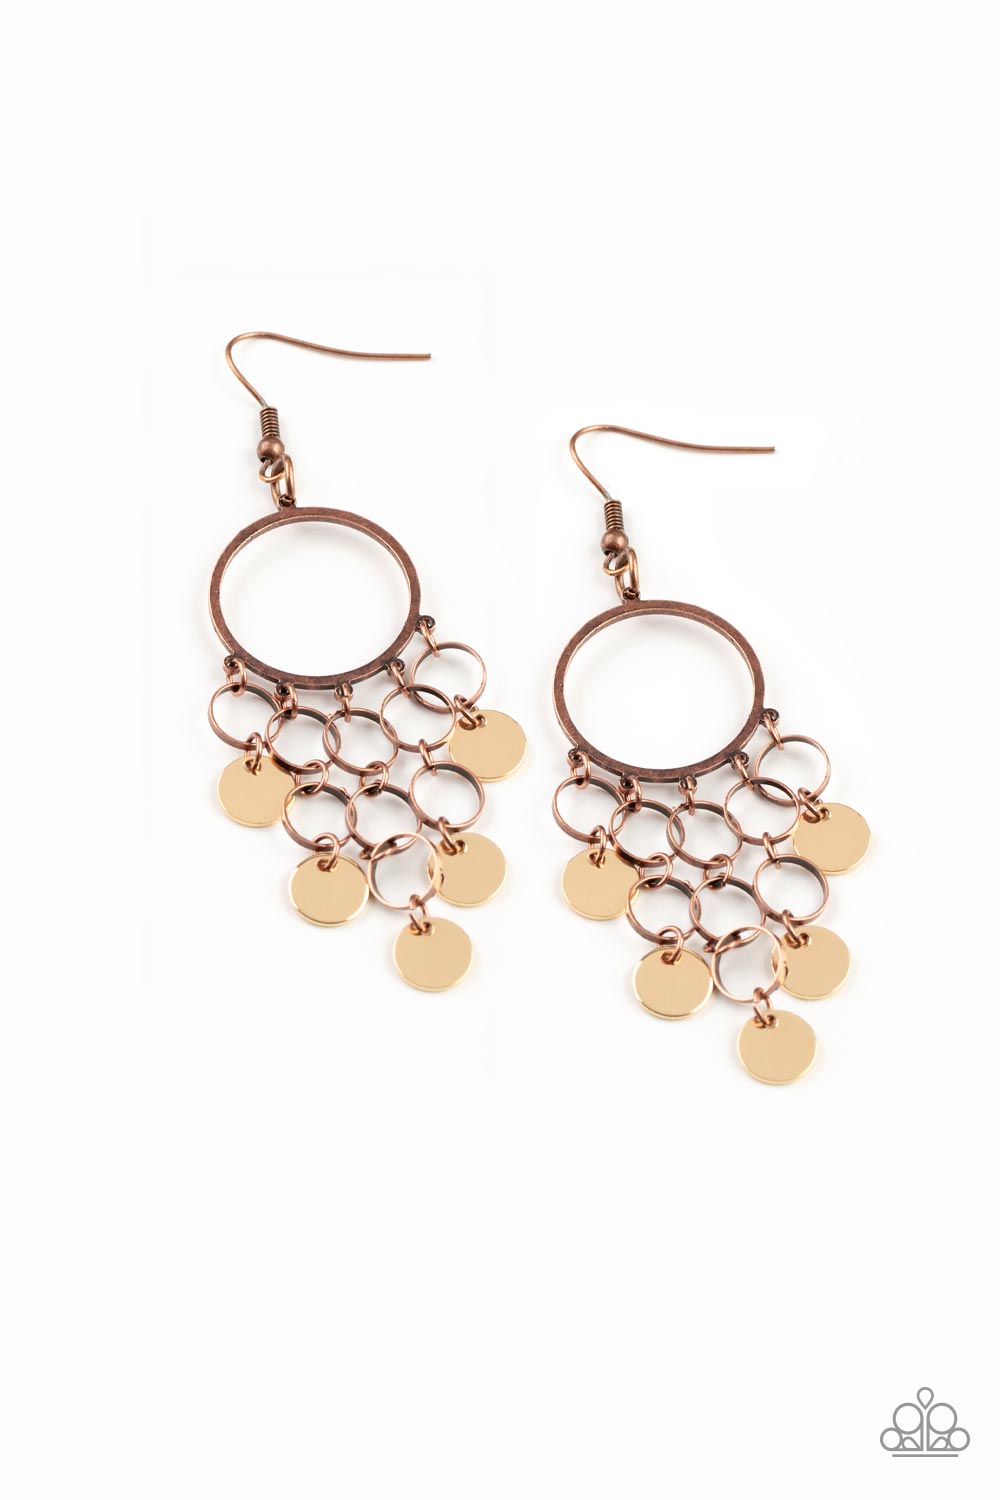 Paparazzi Cyber Chime - Multi Earrings tapered rows of gold discs and dainty copper rings cascade from the bottom of an airy copper hoop, creating a chime-like fringe. Earring attaches to a standard fishhook fitting.  Sold as one pair of earrings.